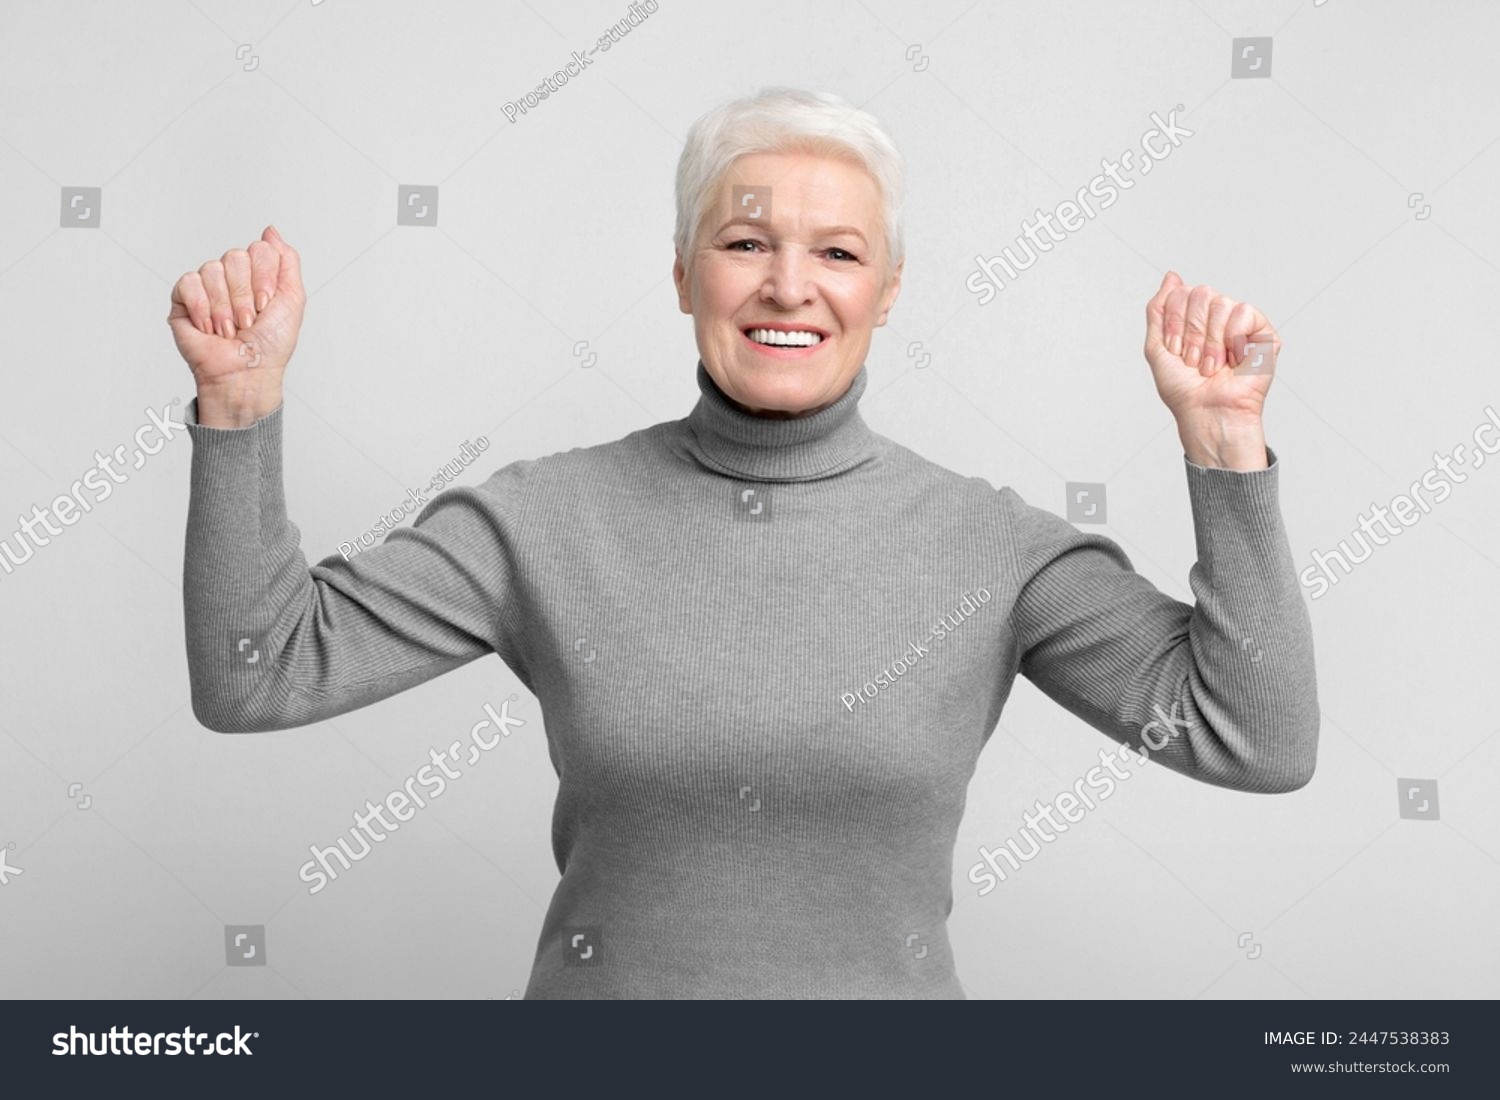 Cheerful senior european woman throws her fists up in a victory pose, ideal image for s3niorlife promotions #2447538383